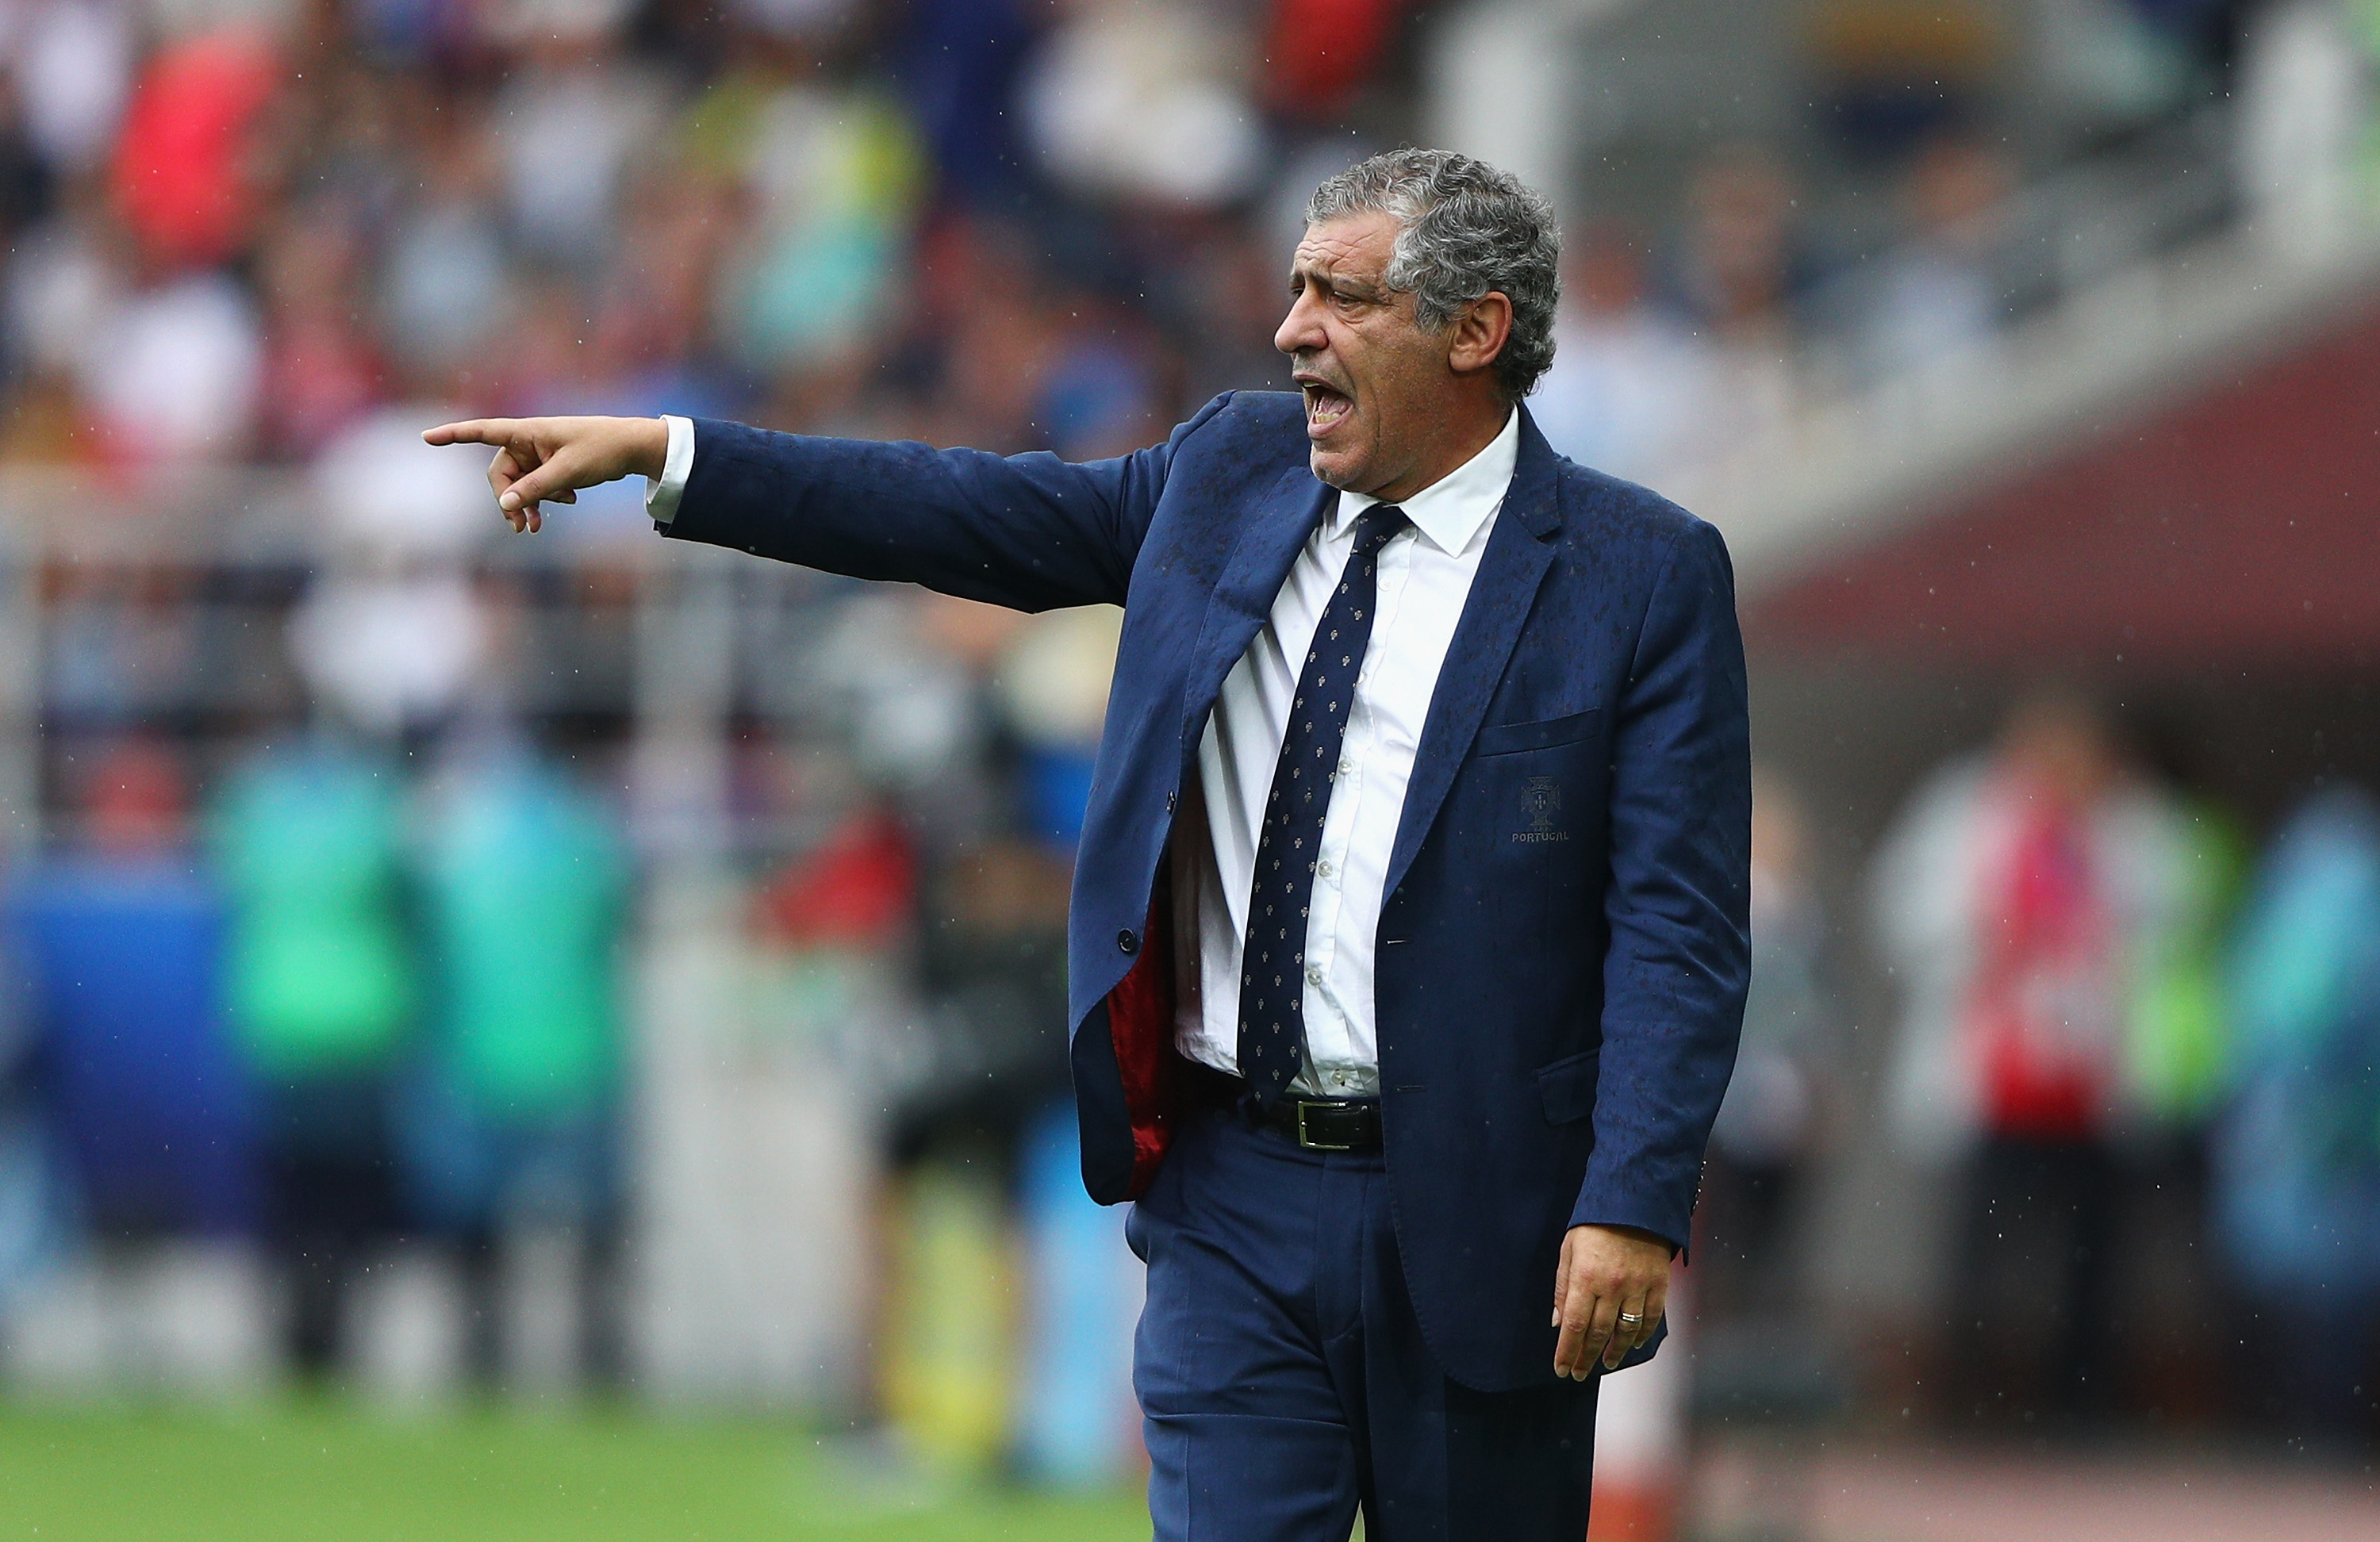 MOSCOW, RUSSIA - JULY 02:  Fernando Santos head coach of Portugal gives his team instructions during the FIFA Confederations Cup Russia 2017  Play-Off for Third Place between Portugal and Mexico at Spartak Stadium on July 2, 2017 in Moscow, Russia.  (Photo by Ian Walton/Getty Images)